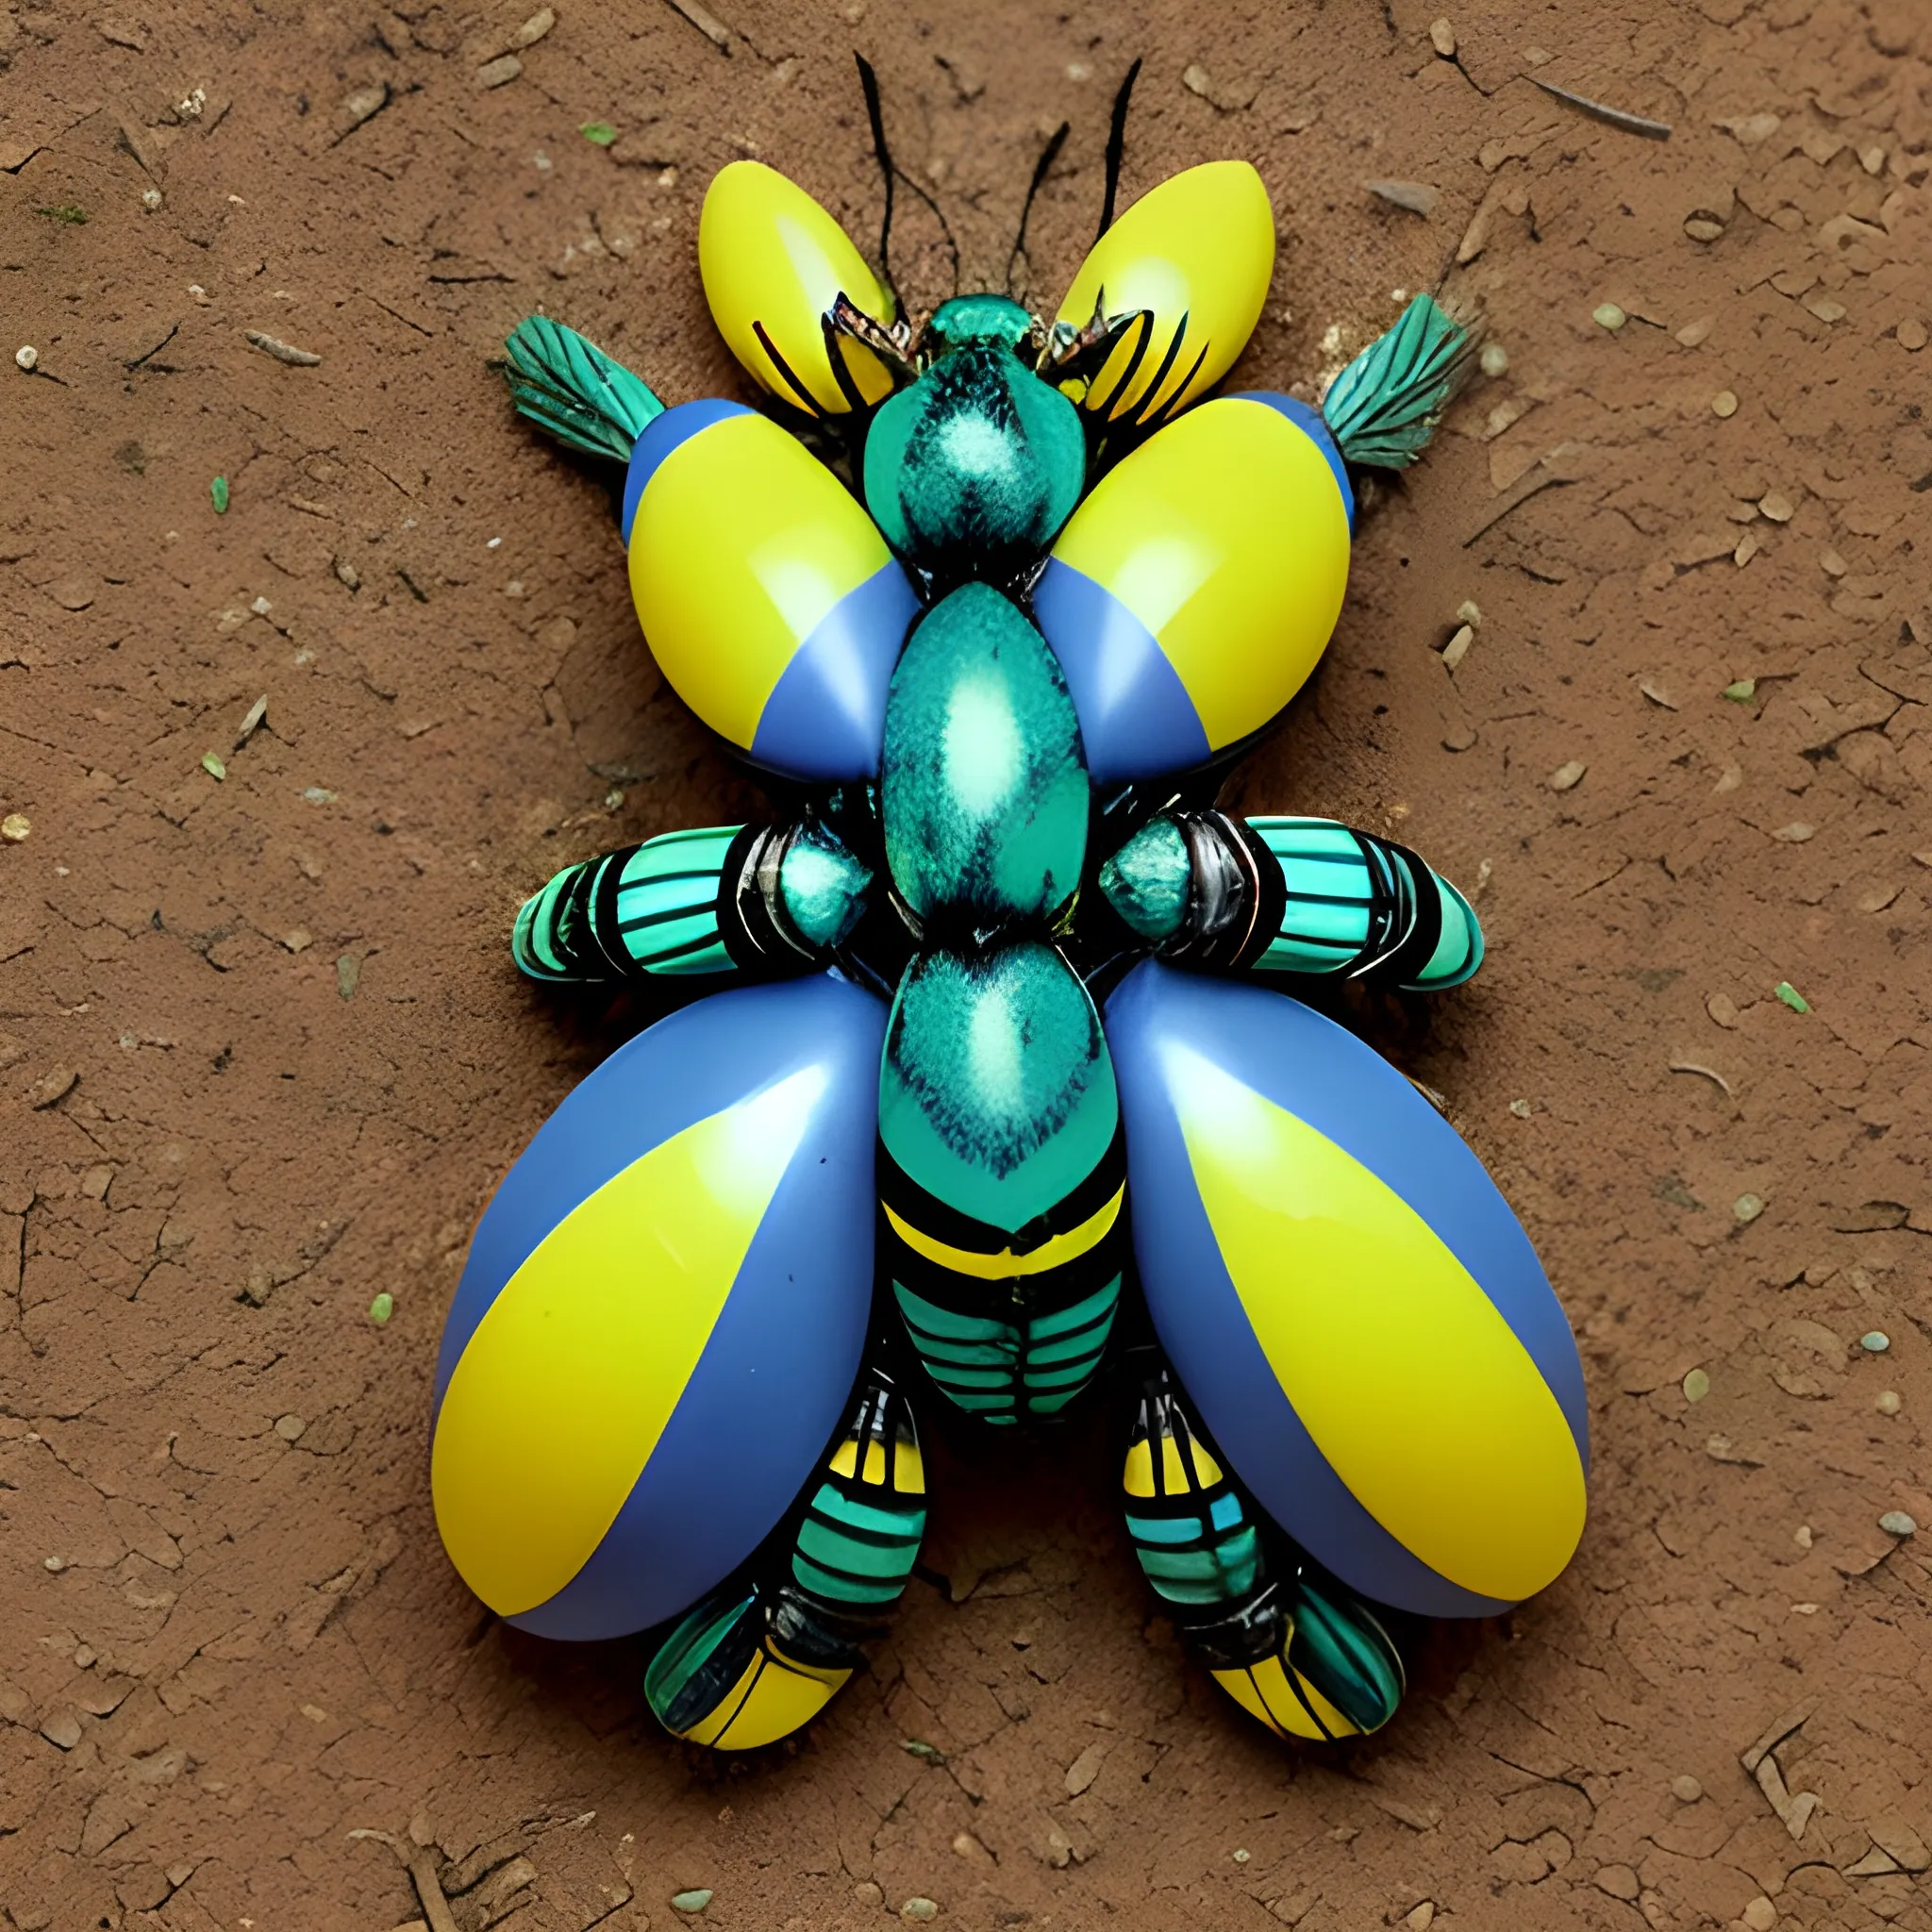 Insectile furry fluffy feline hybrid of rabbit and bumblebee, with blue and green and white stripes, with predatory mandibles and segmented body and six jointed legs with tube feet, with brightly coloured eggs, on rough scrubland, at night, very detailed, Trippy